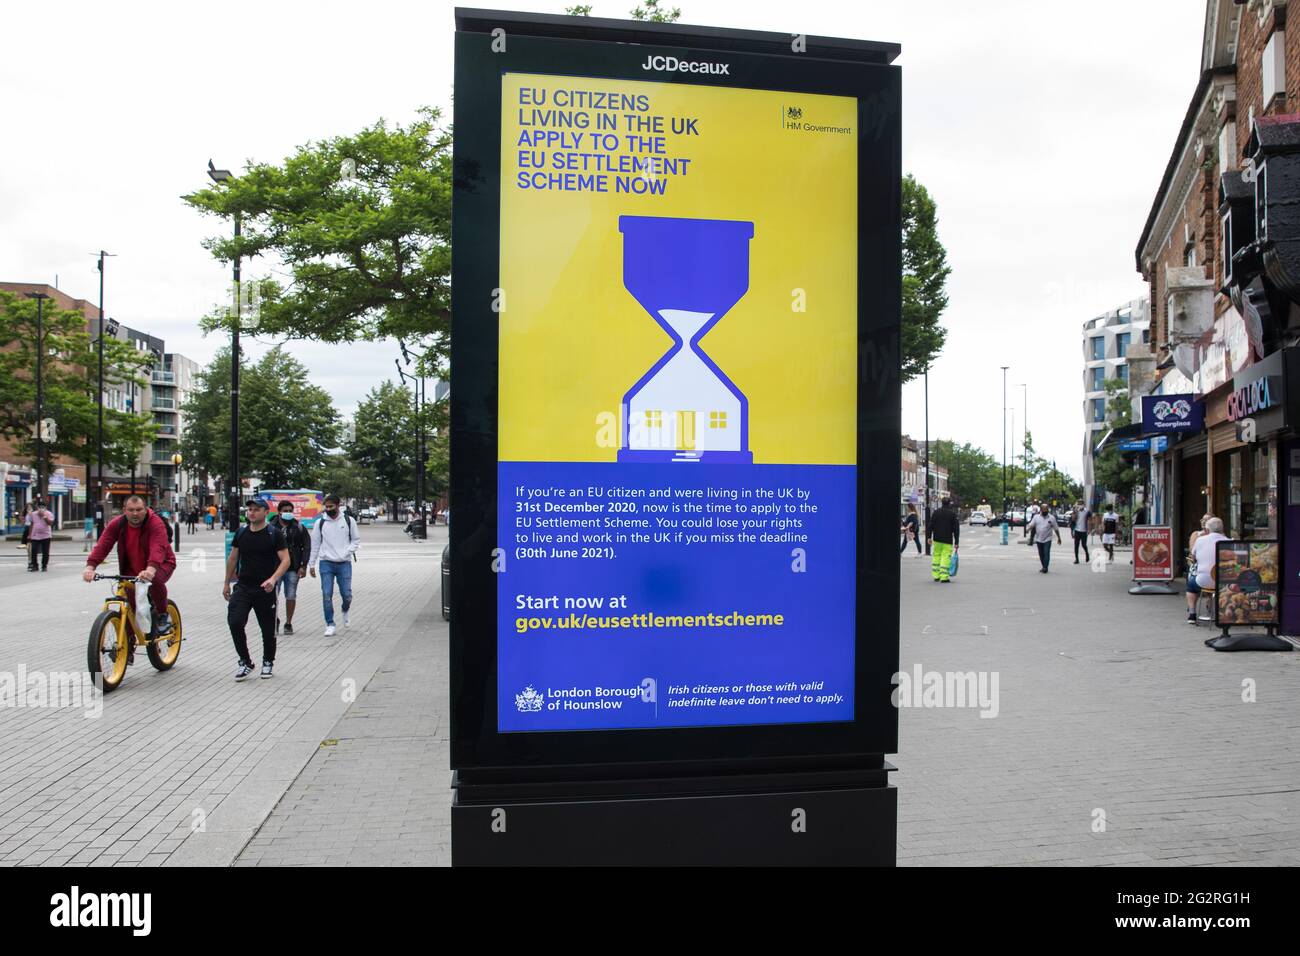 Hounslow, UK. 11th June, 2022. An advertisement for the EU Settlement Scheme appears on a display screen in the High Street. The UK government is using such advertisements to urge EU citizens living in the UK by 31st December 2020 to apply to the EU Settlement Scheme by 30th June 2021. Credit: Mark Kerrison/Alamy Live News Stock Photo